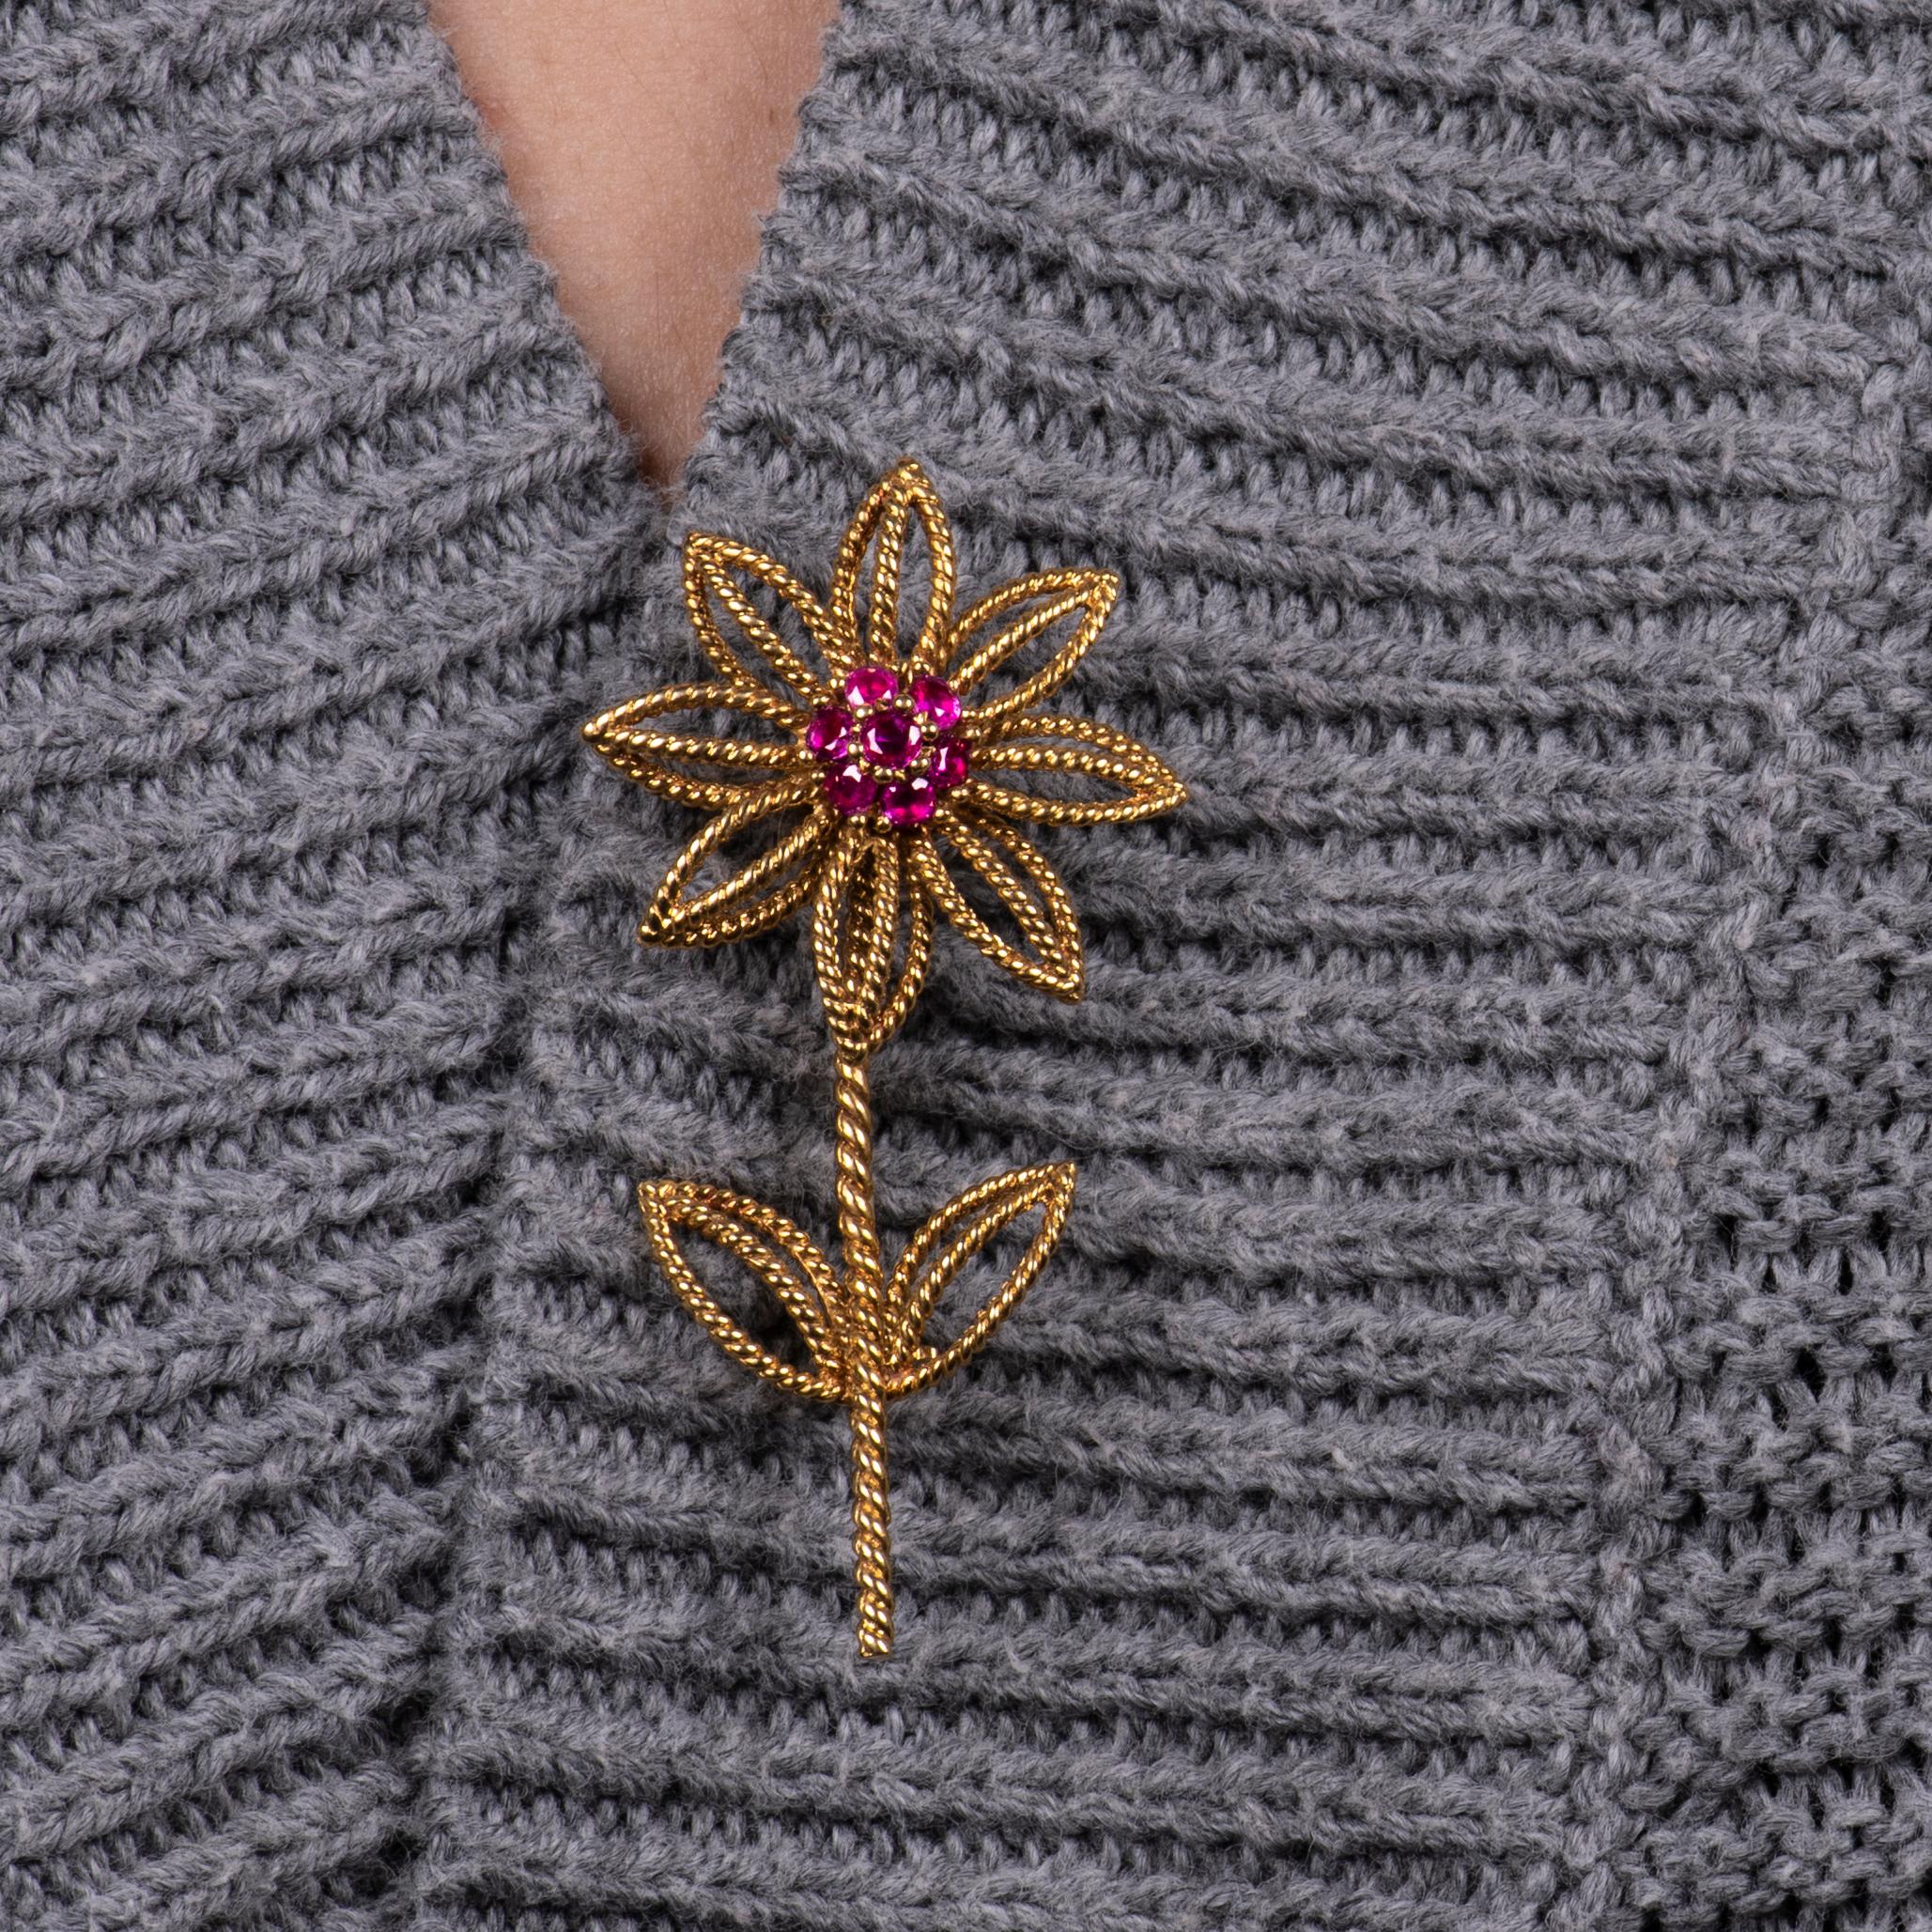 Vintage Tiffany & Co ruby flower brooch in 18K yellow gold with approximately 0.06 carats in fine rubies. 
